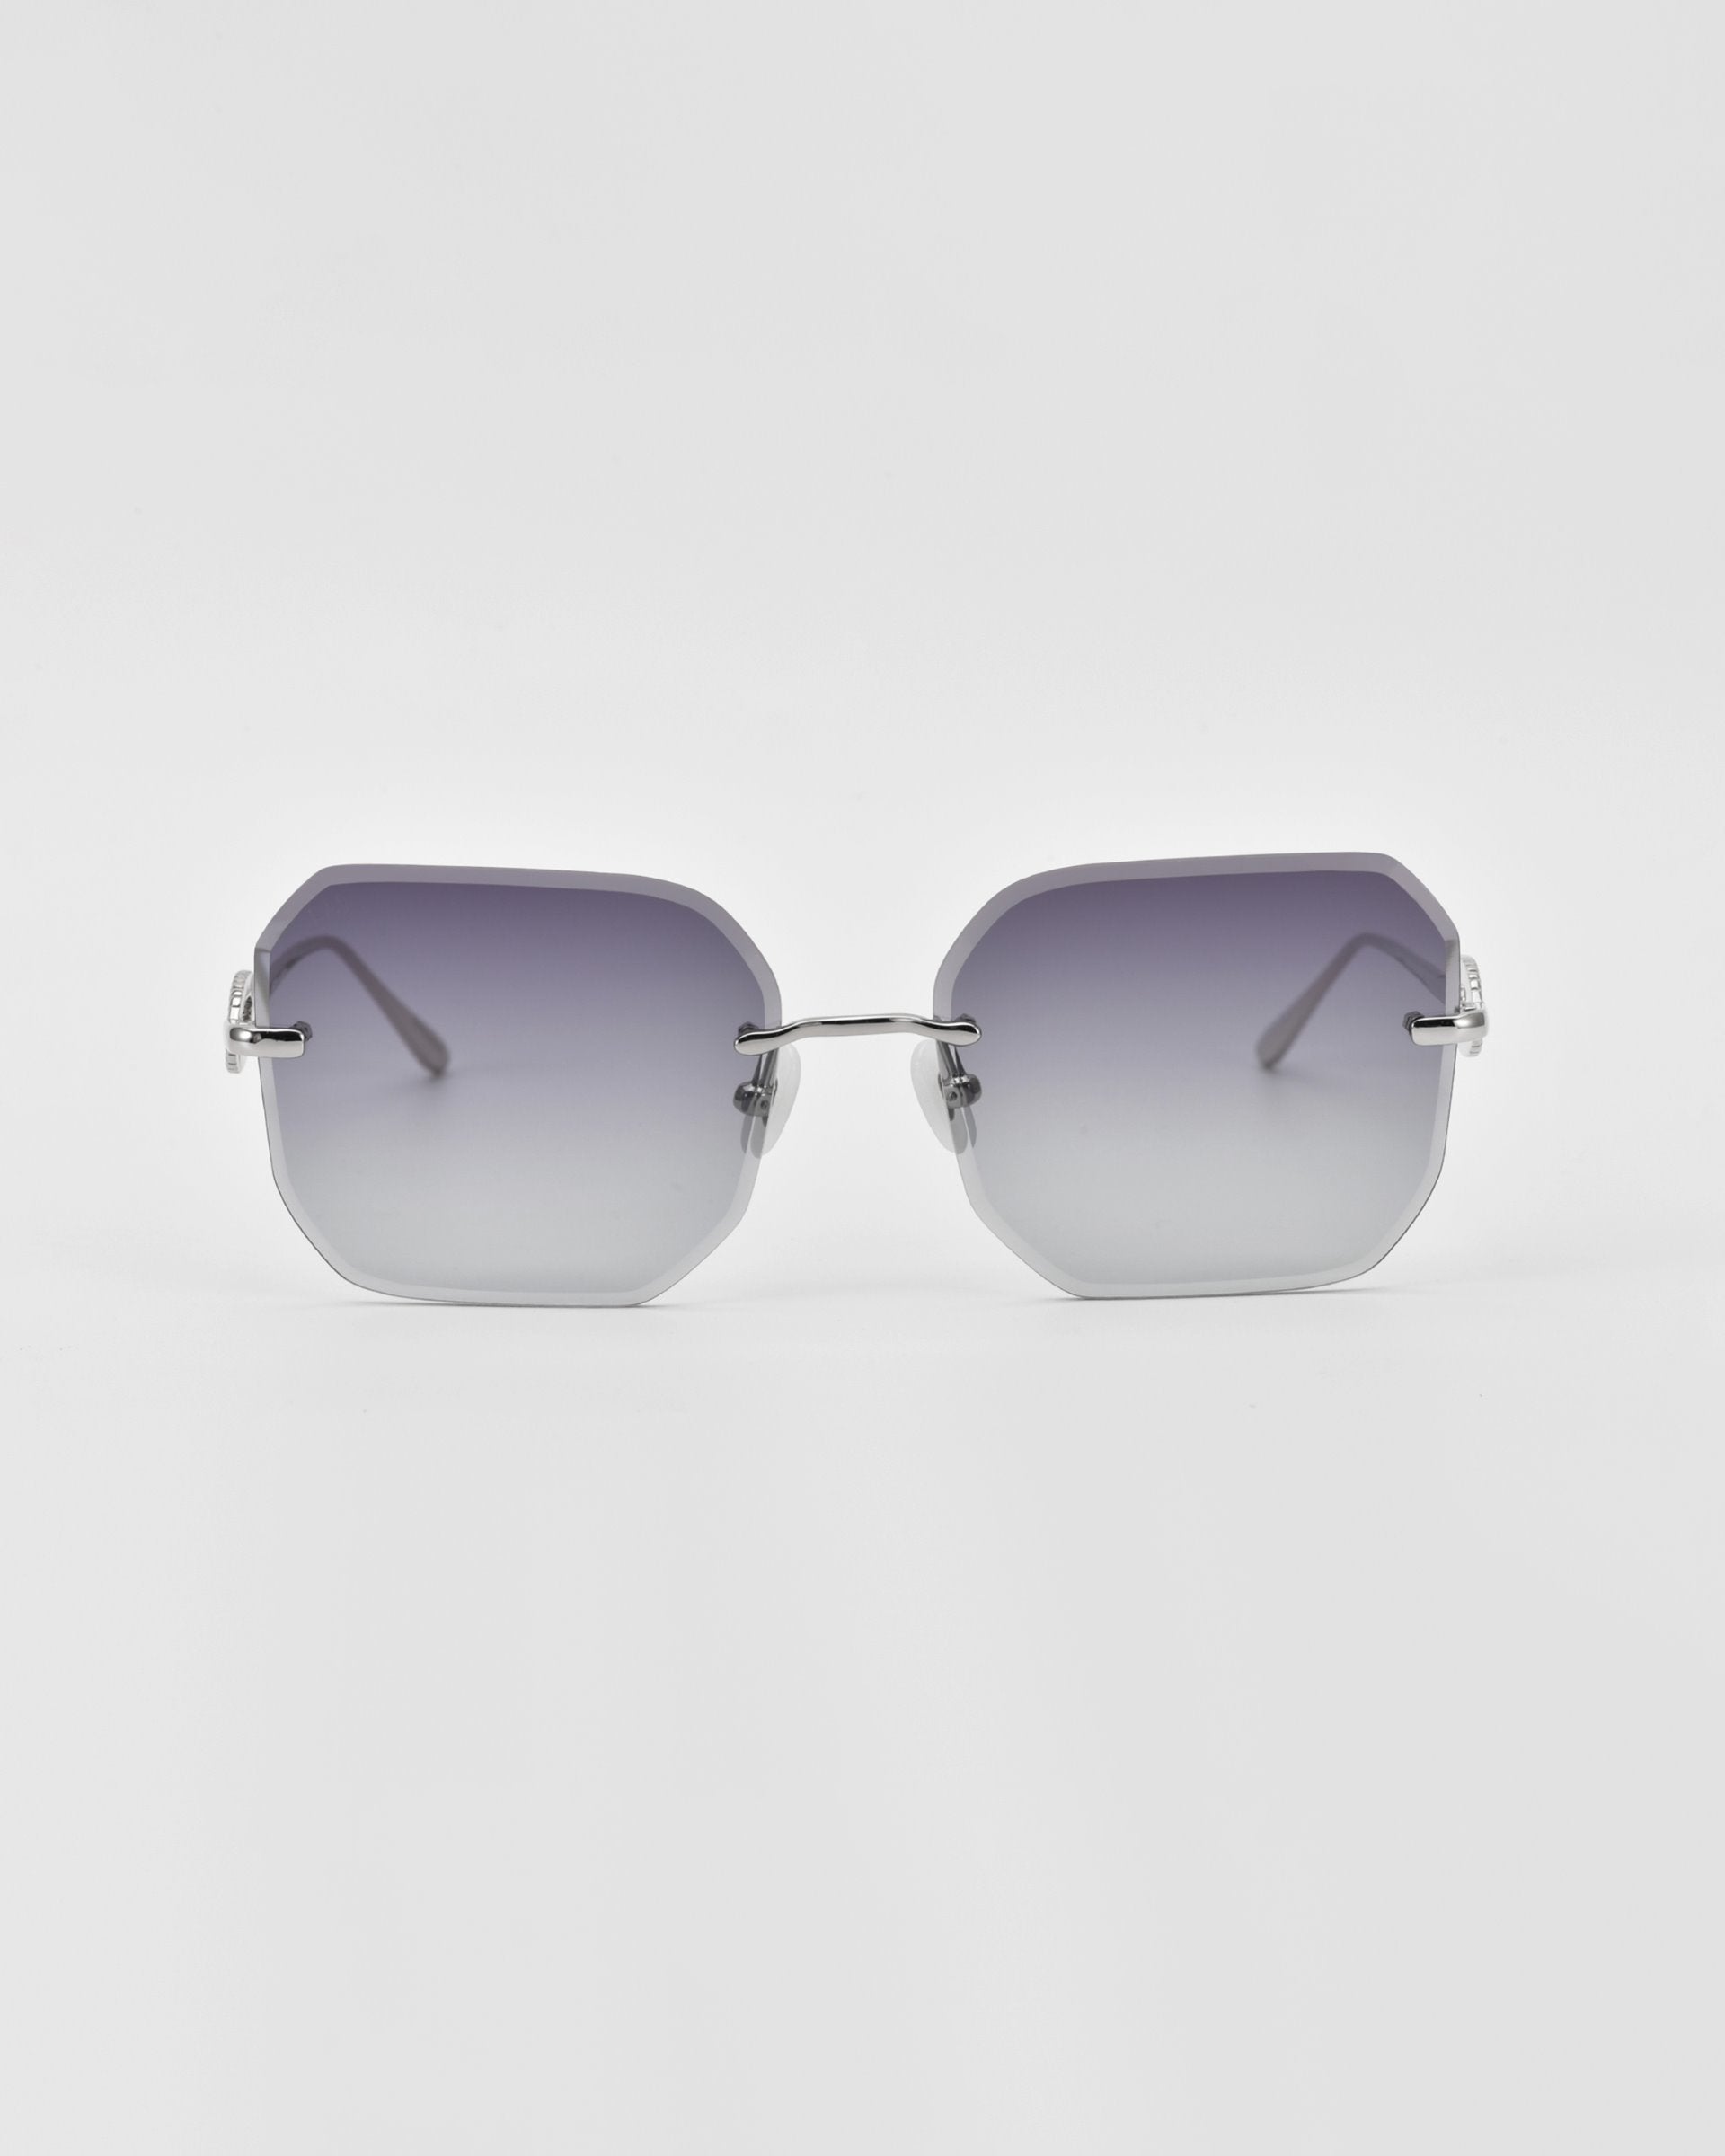 A pair of For Art's Sake® Aria rimless sunglasses with gradient lenses transitioning from dark gray at the top to light gray at the bottom. The sunglasses have thin, silver-tone metal arms and lack any visible jade-stone nose pads or additional frame components. The background is white.